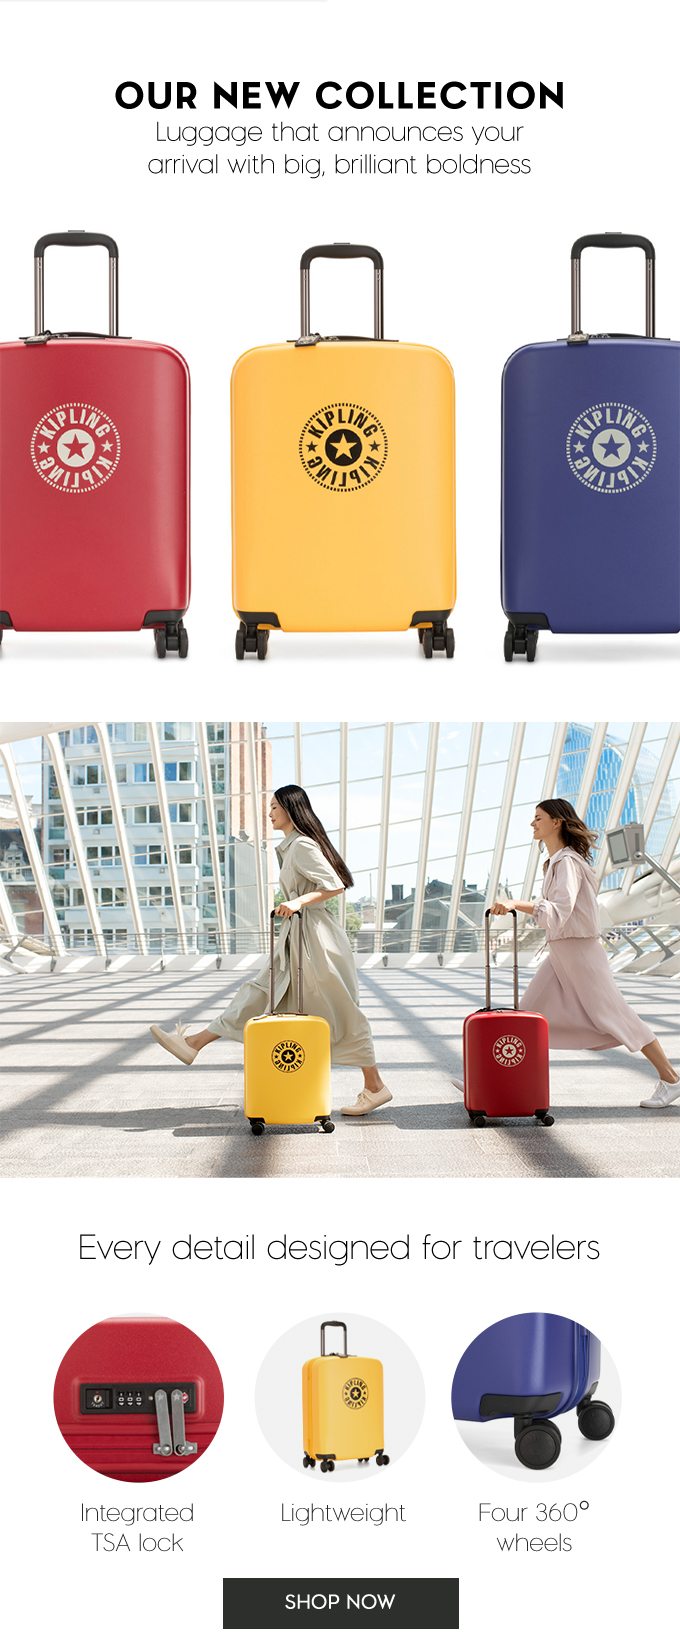 Our New Collection. Luggage that announces your arrival with big, brillant boldness.